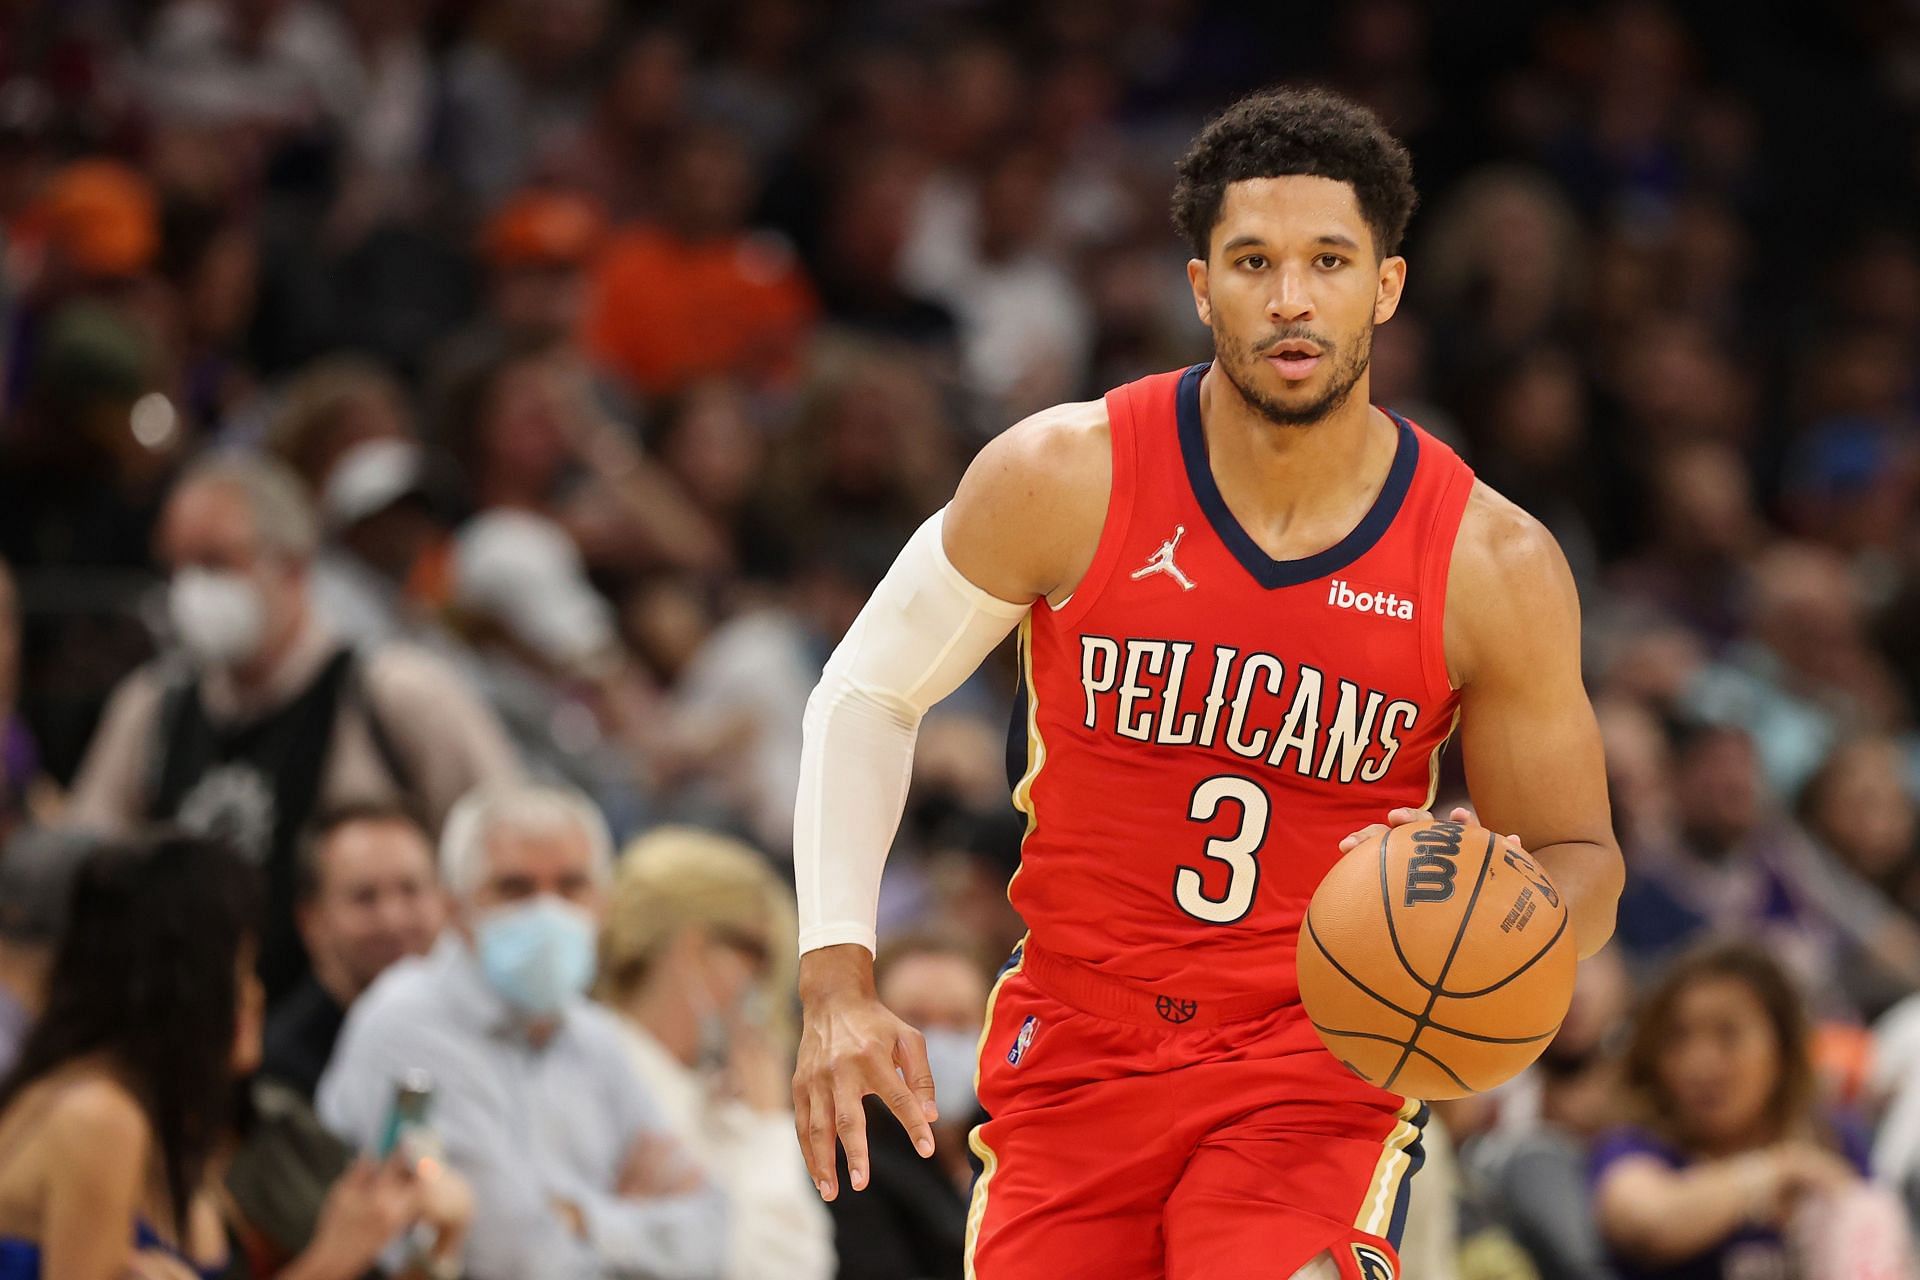 Josh Hart #3 of the New Orleans Pelicans handles the ball during the NBA game at Footprint Center on November 02, 2021 in Phoenix, Arizona.